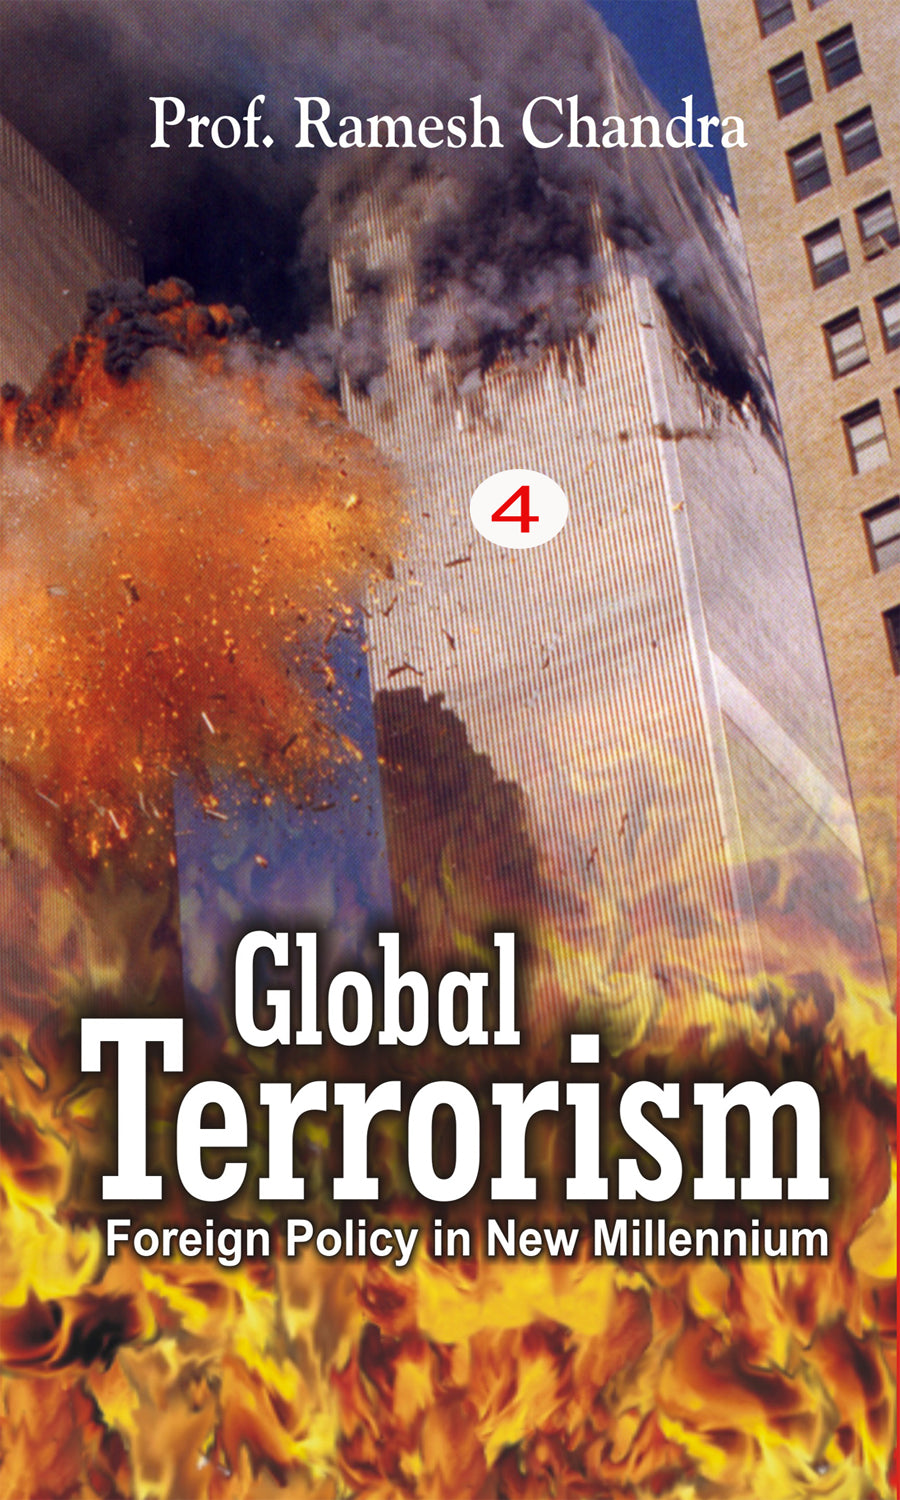 Global Terrorism: a Threat to Humanity (World in Transition) Volume Vol. 4th [Hardcover]